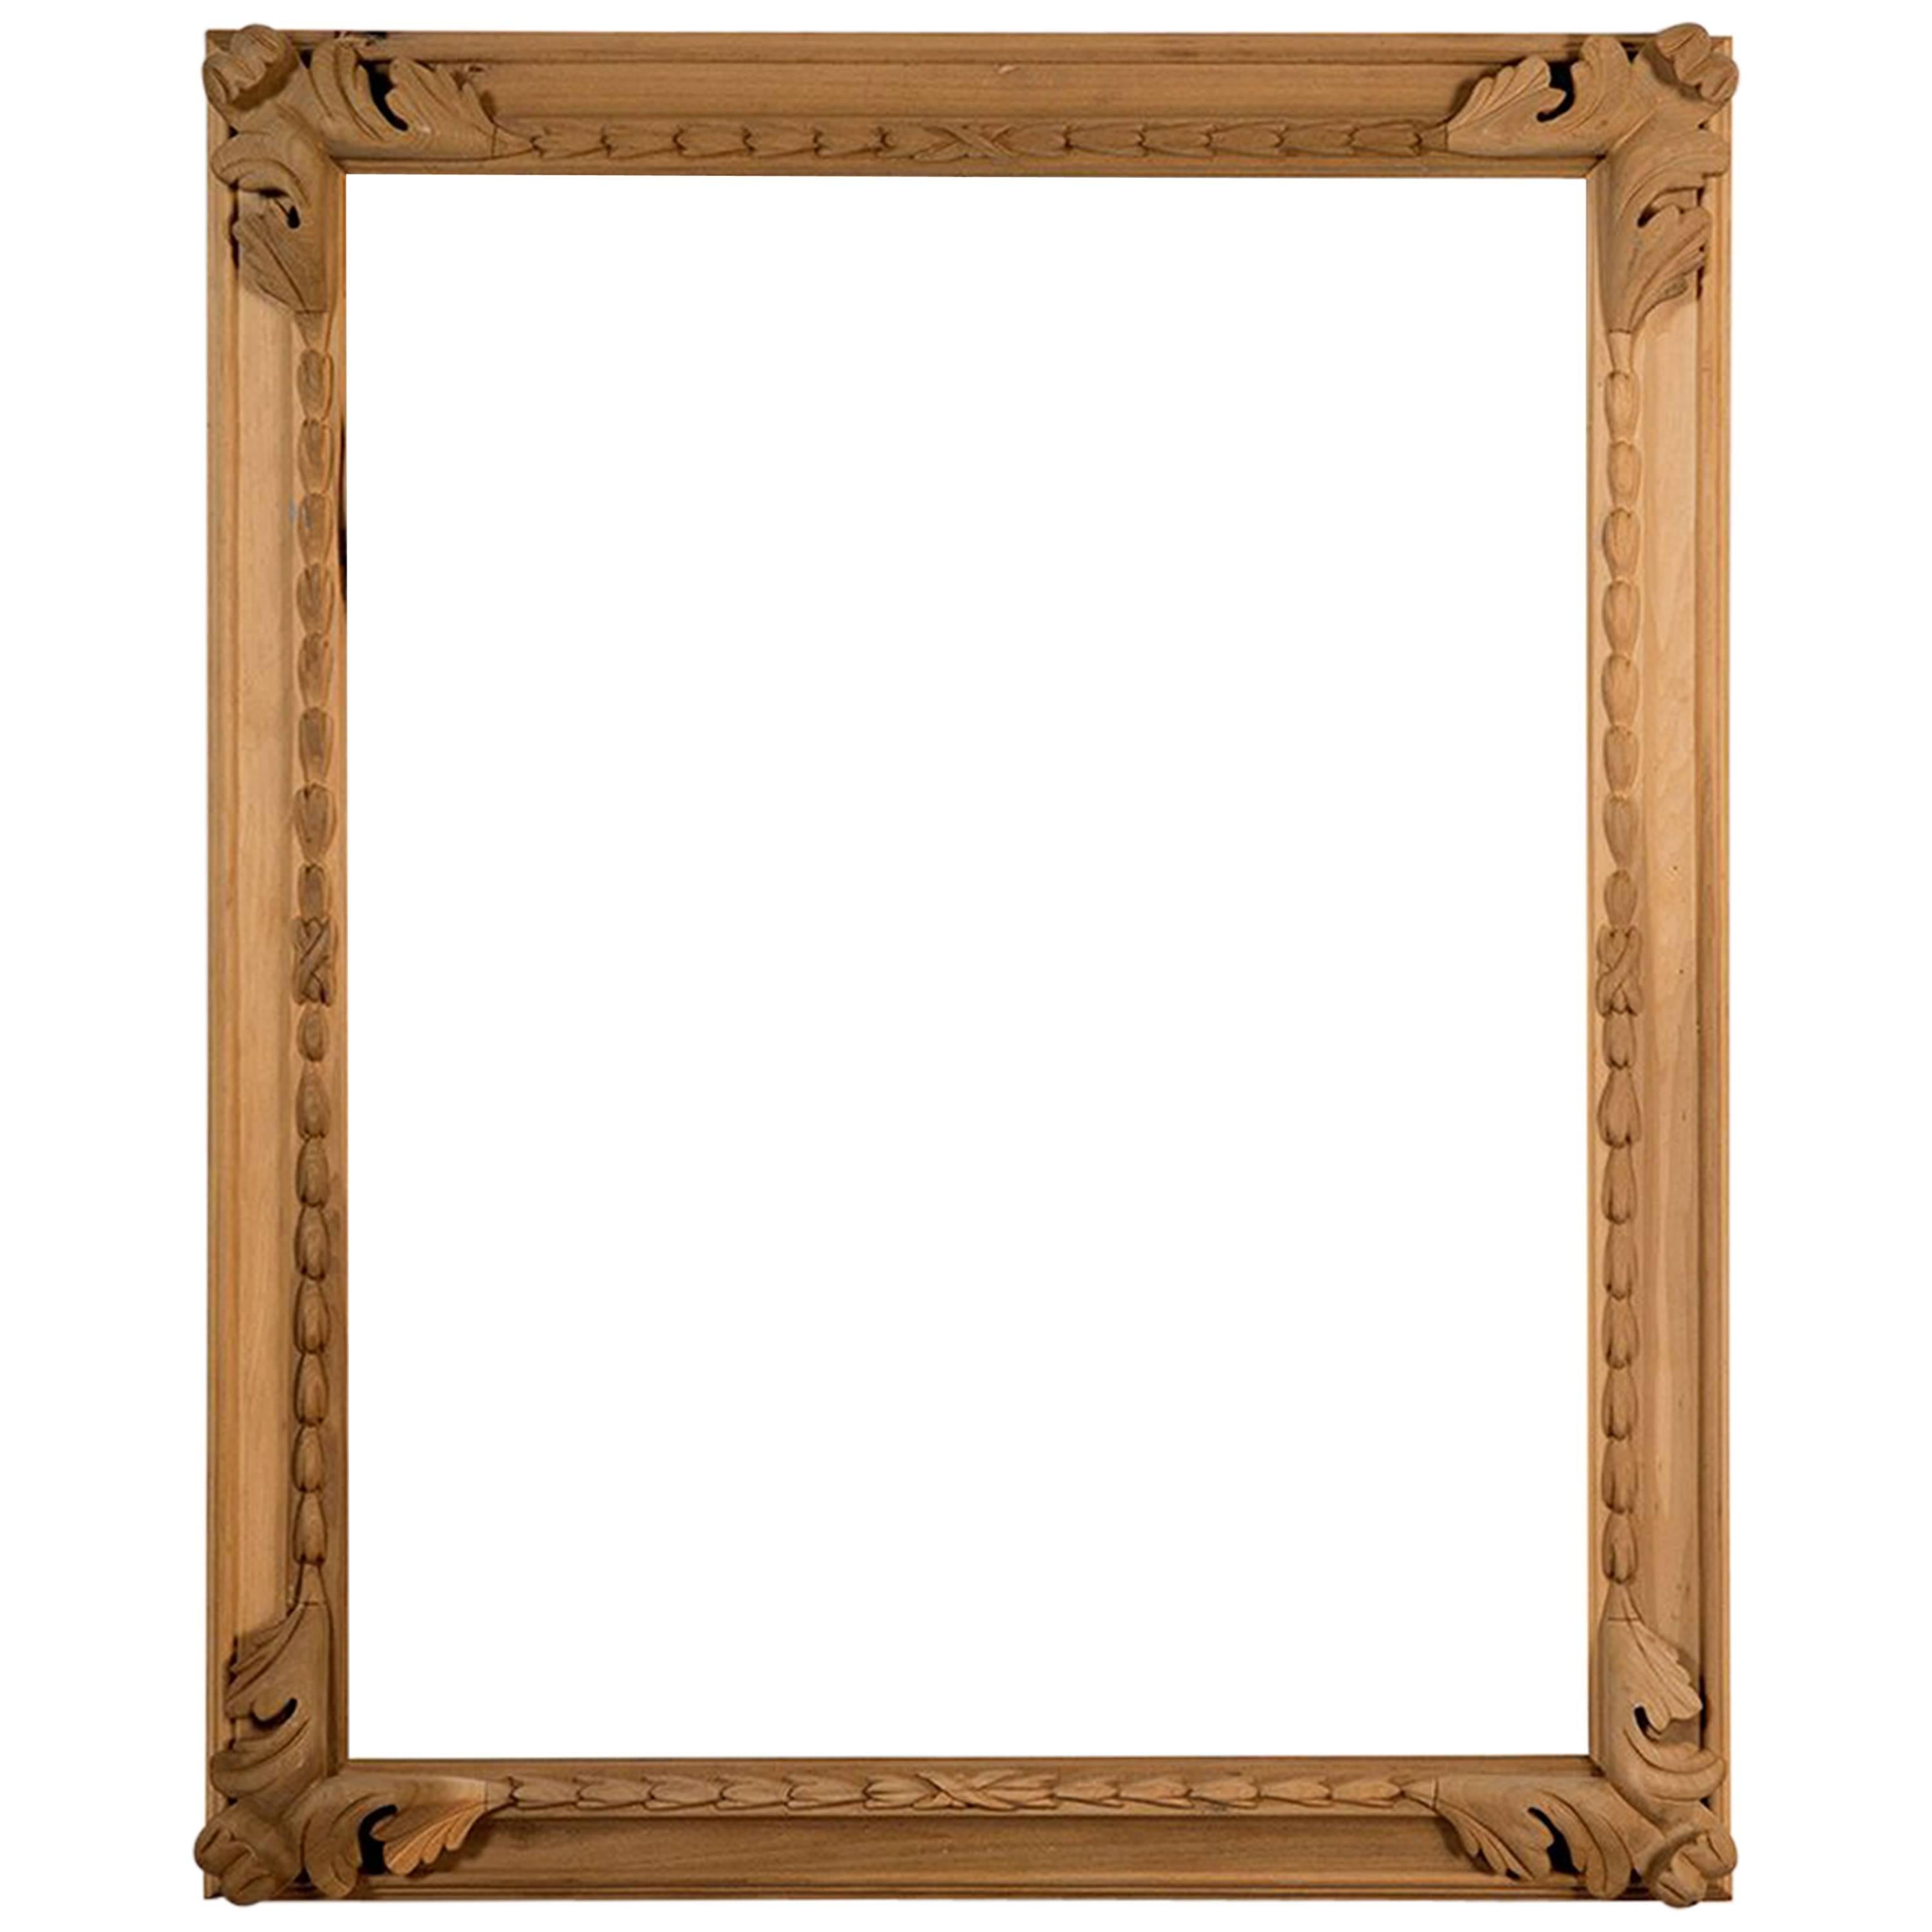 Hand Carved Poplar Frame with Large Acanthus Leaf Corners